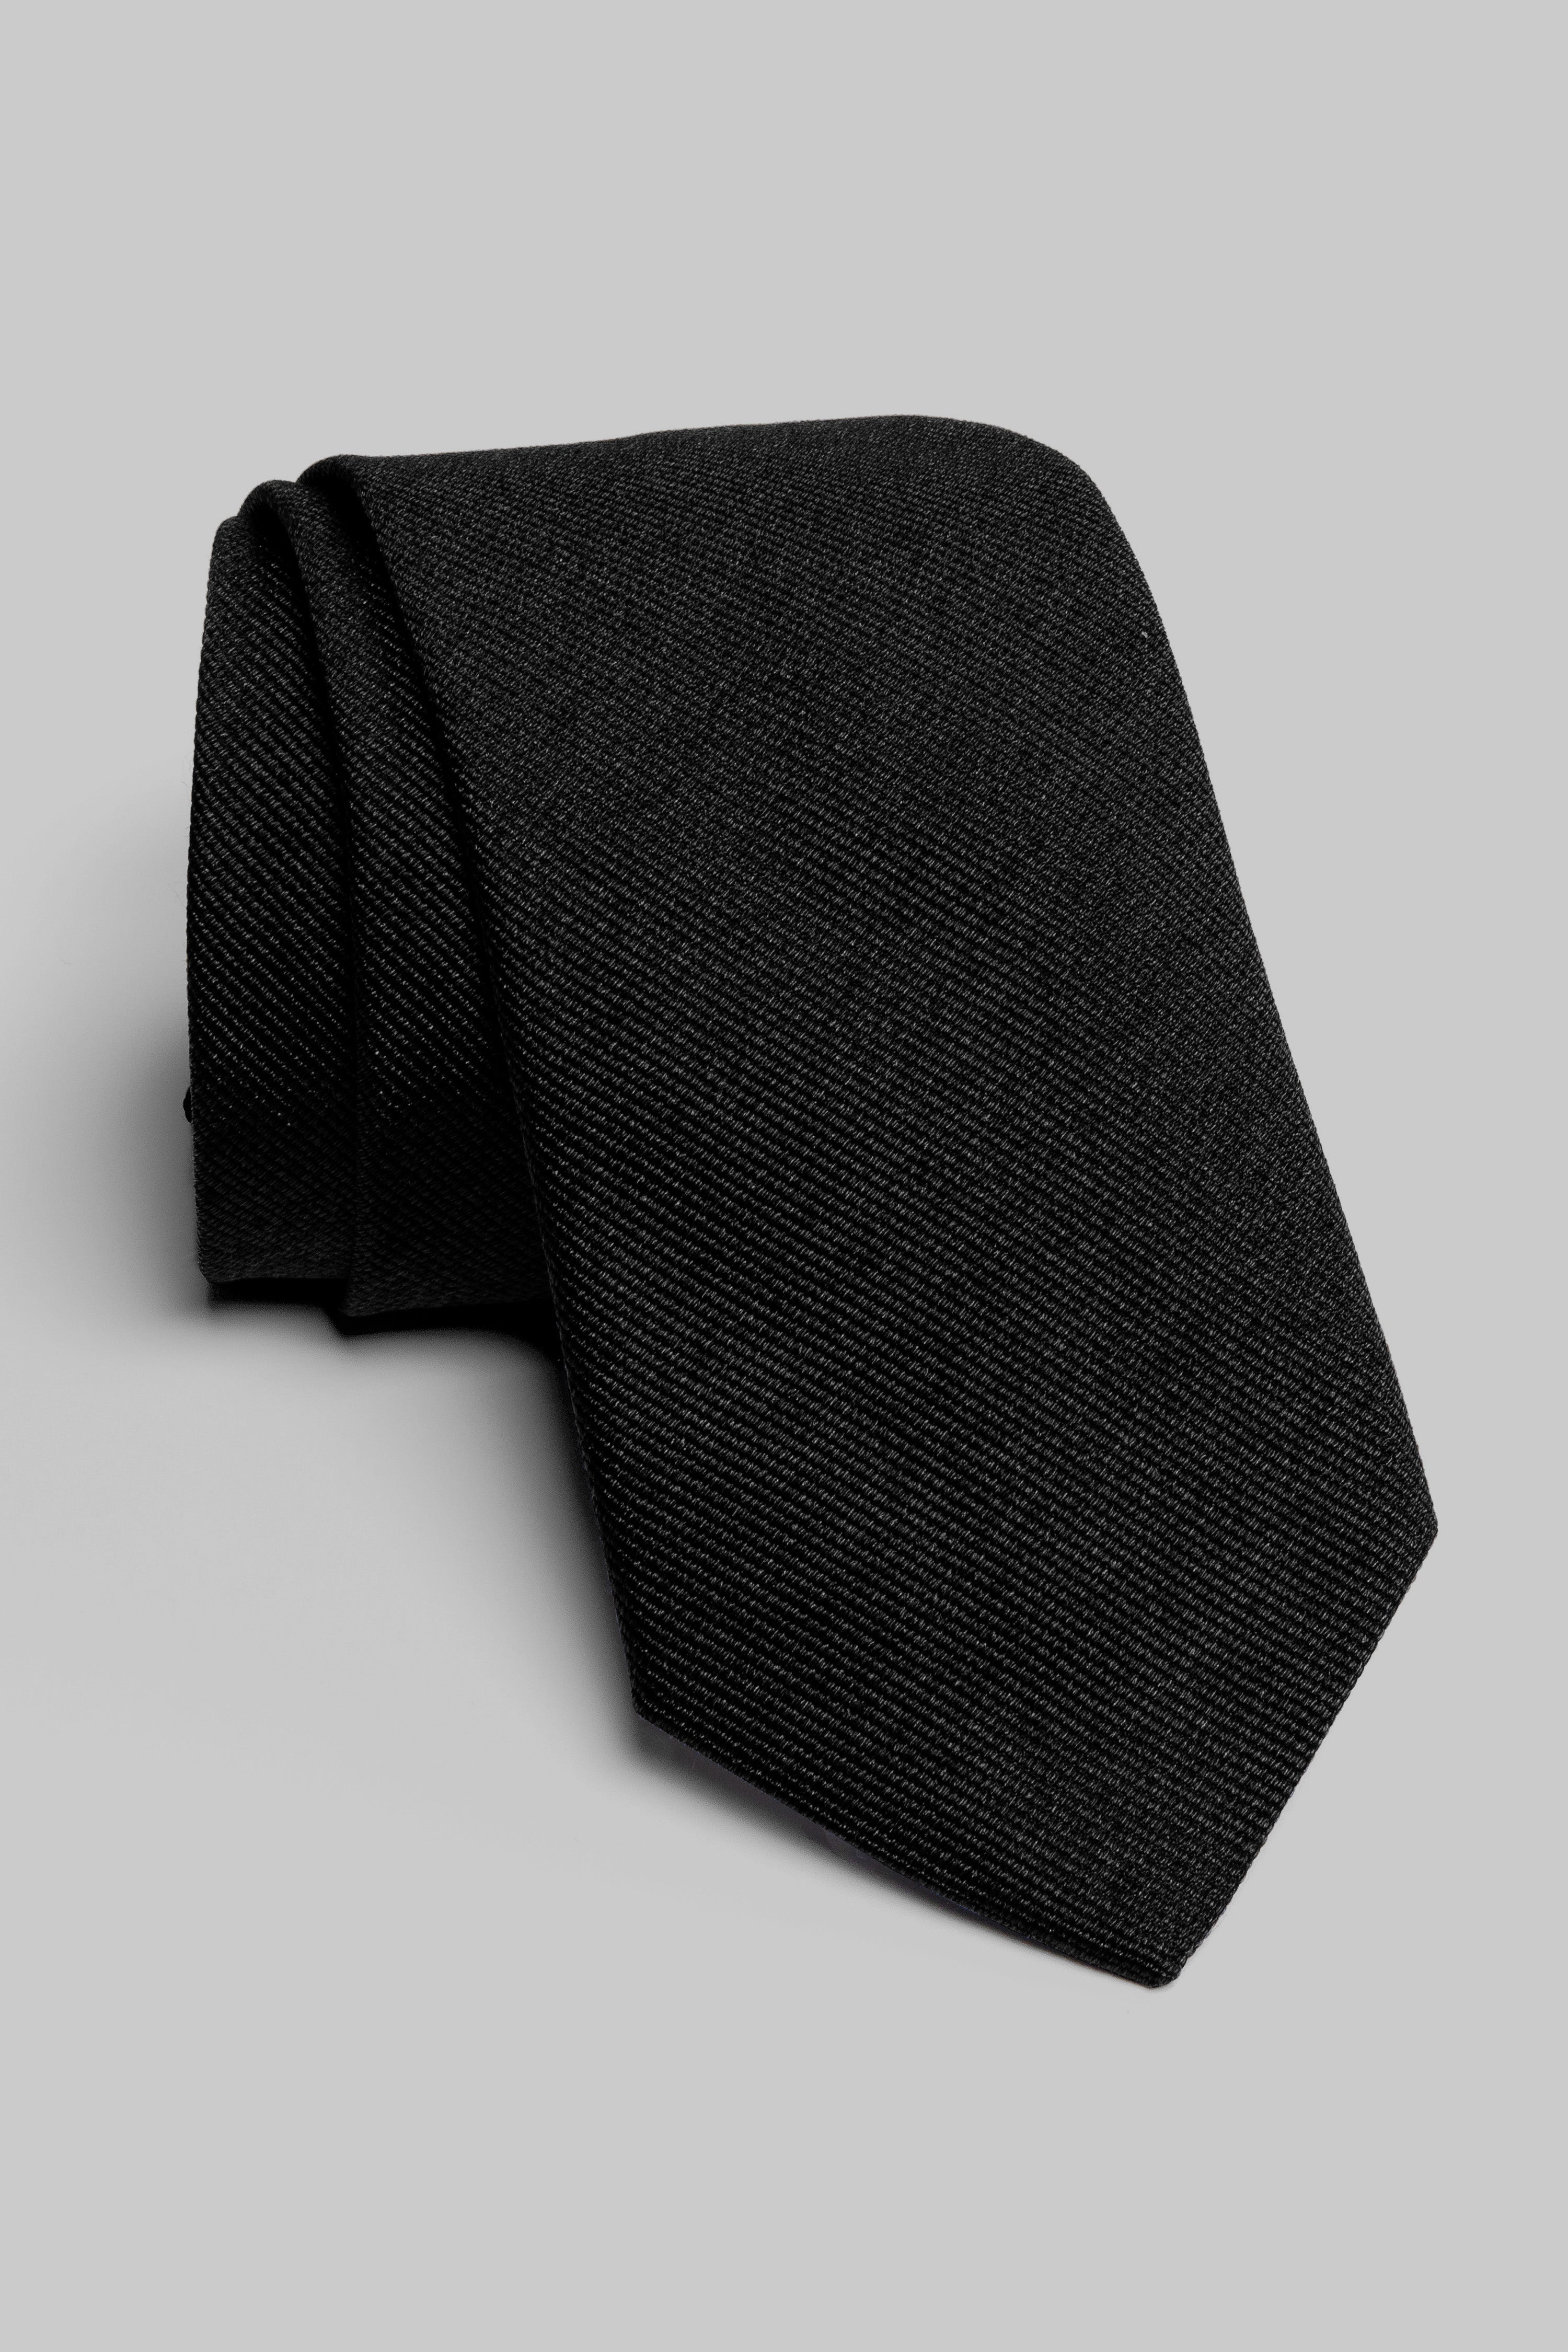 Alt view Bowman Solid Woven Tie in Black